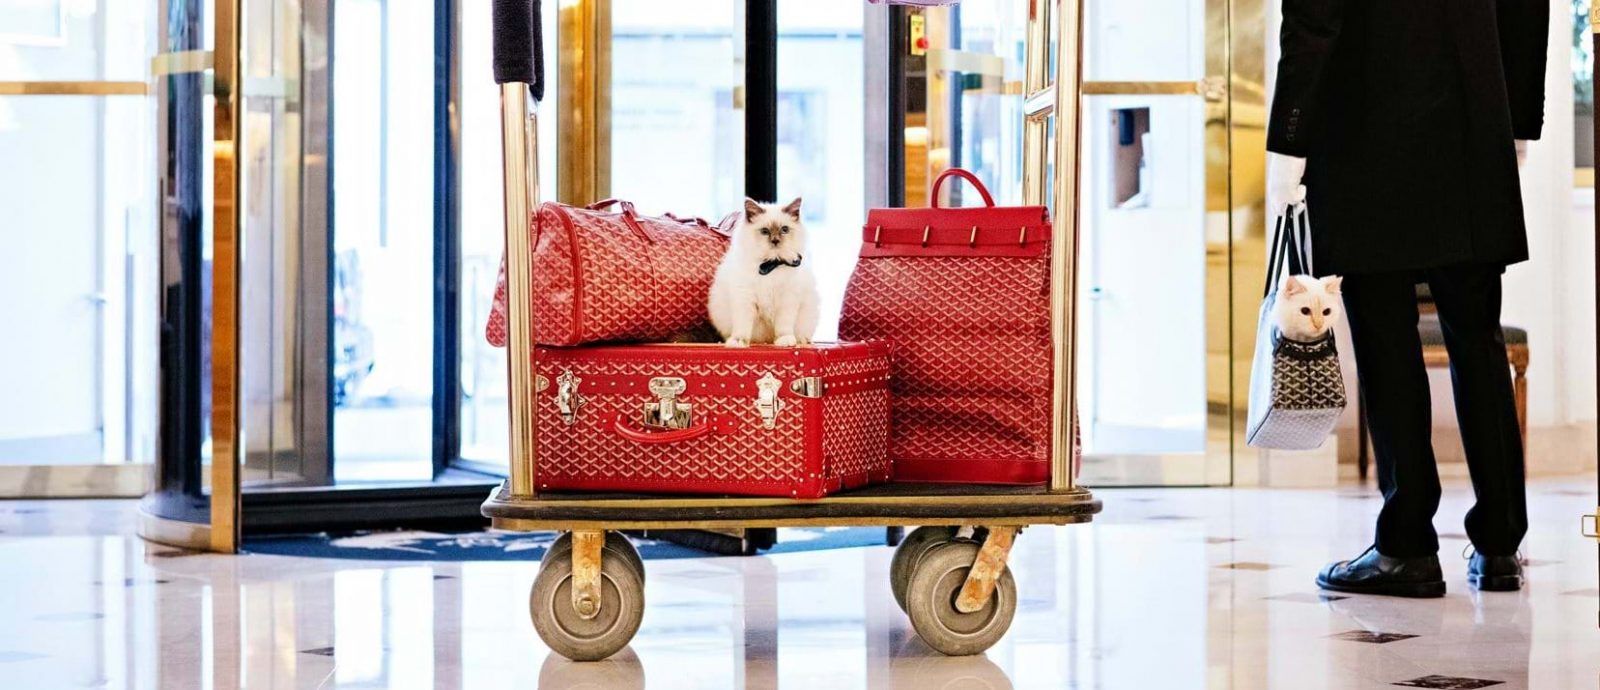 Luxury hotels around the world with adorable animals in residence